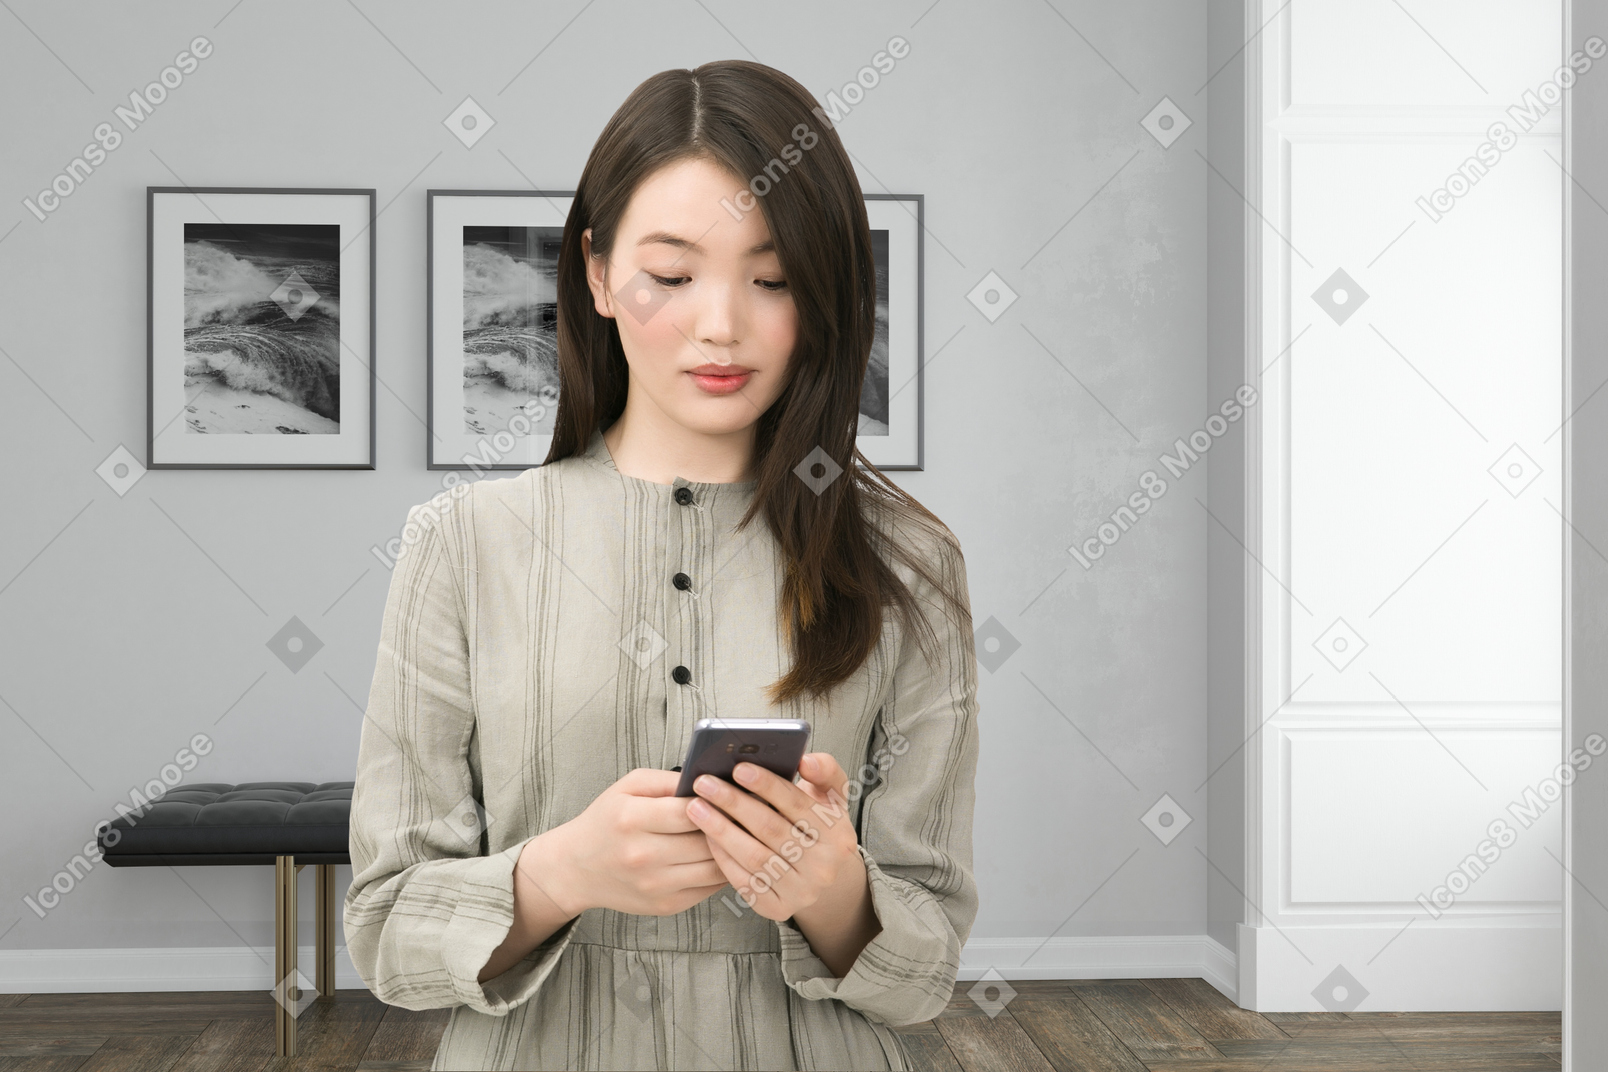 A woman standing in a room looking at her cell phone